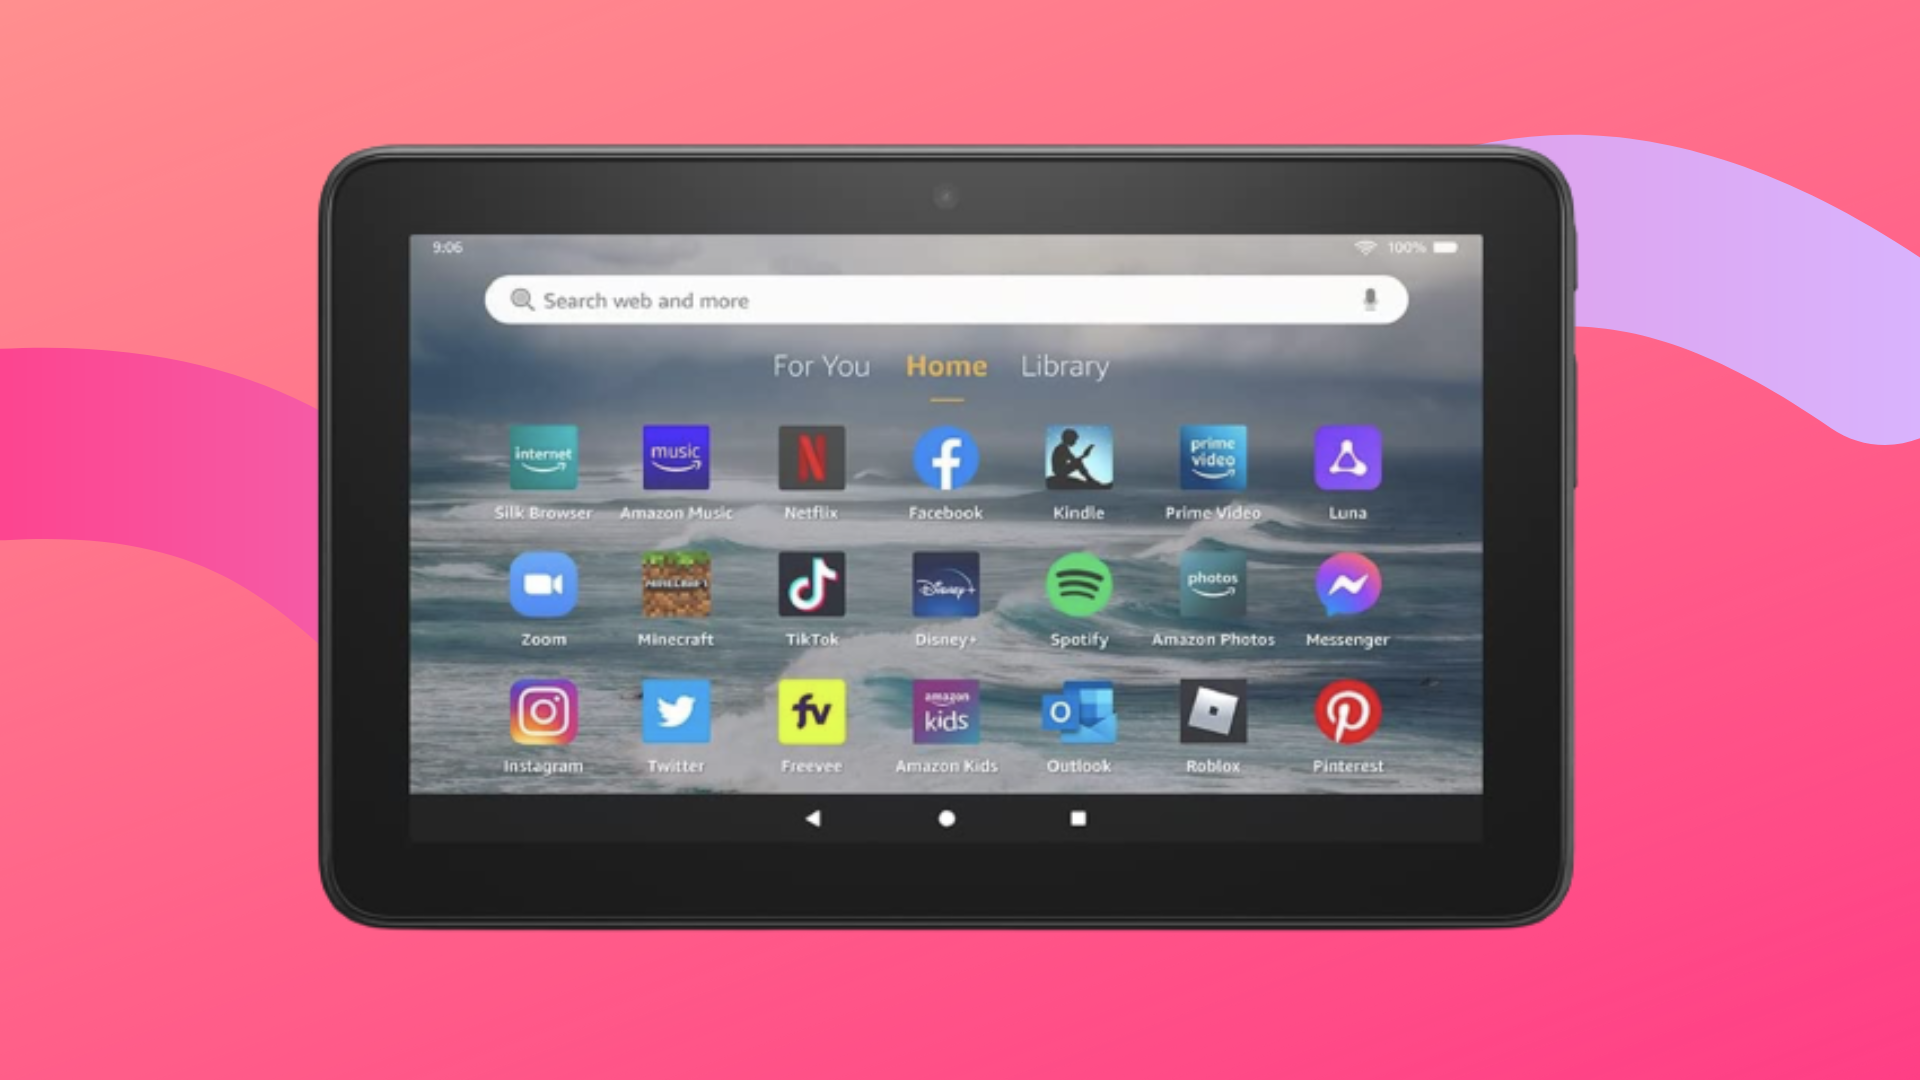 Need a basic tablet? Amazon’s Fire 7 is 30% off